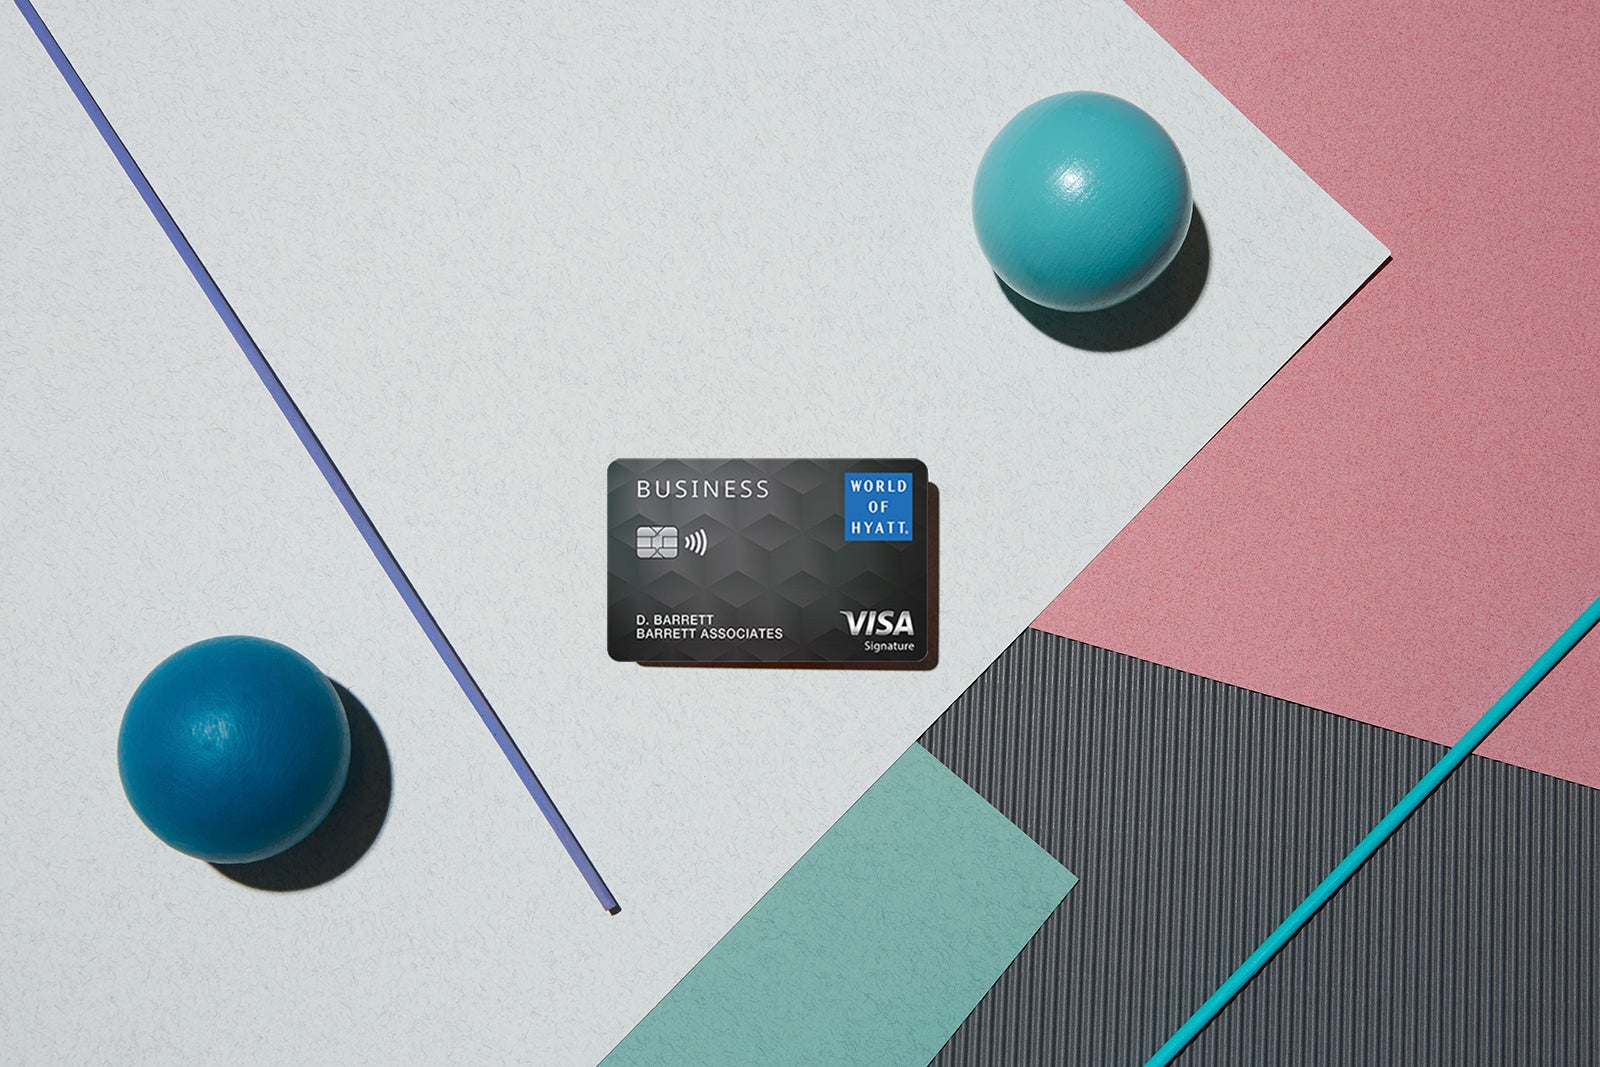 photo shows the World of Hyatt Business Credit card set against a multi-colored background